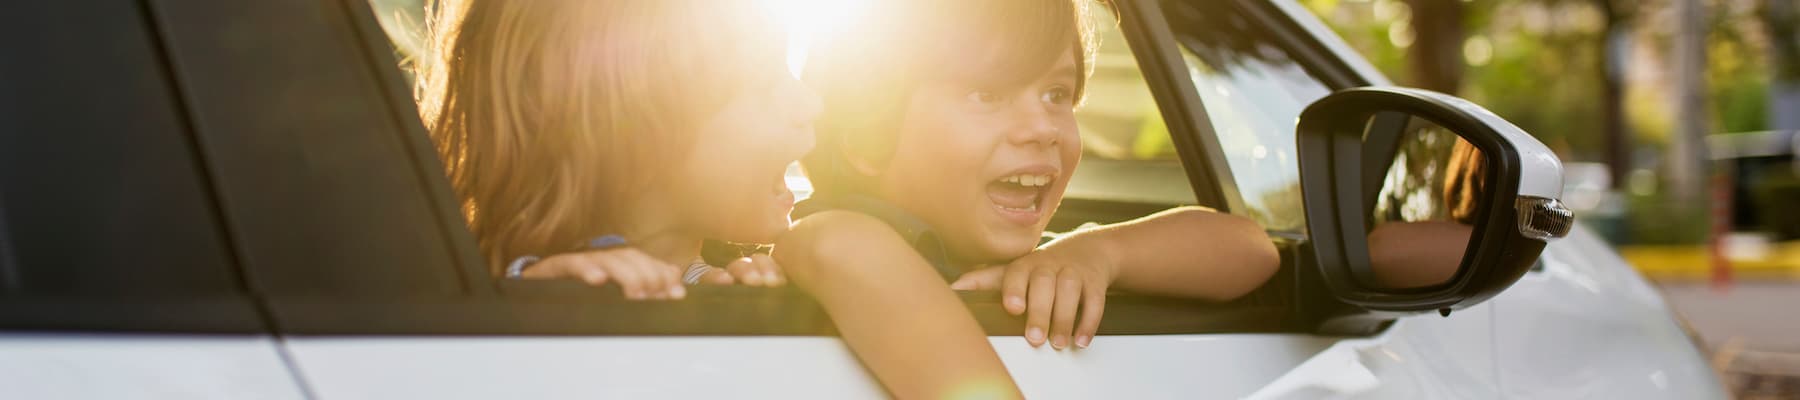 two children hanging out window of white car smiling